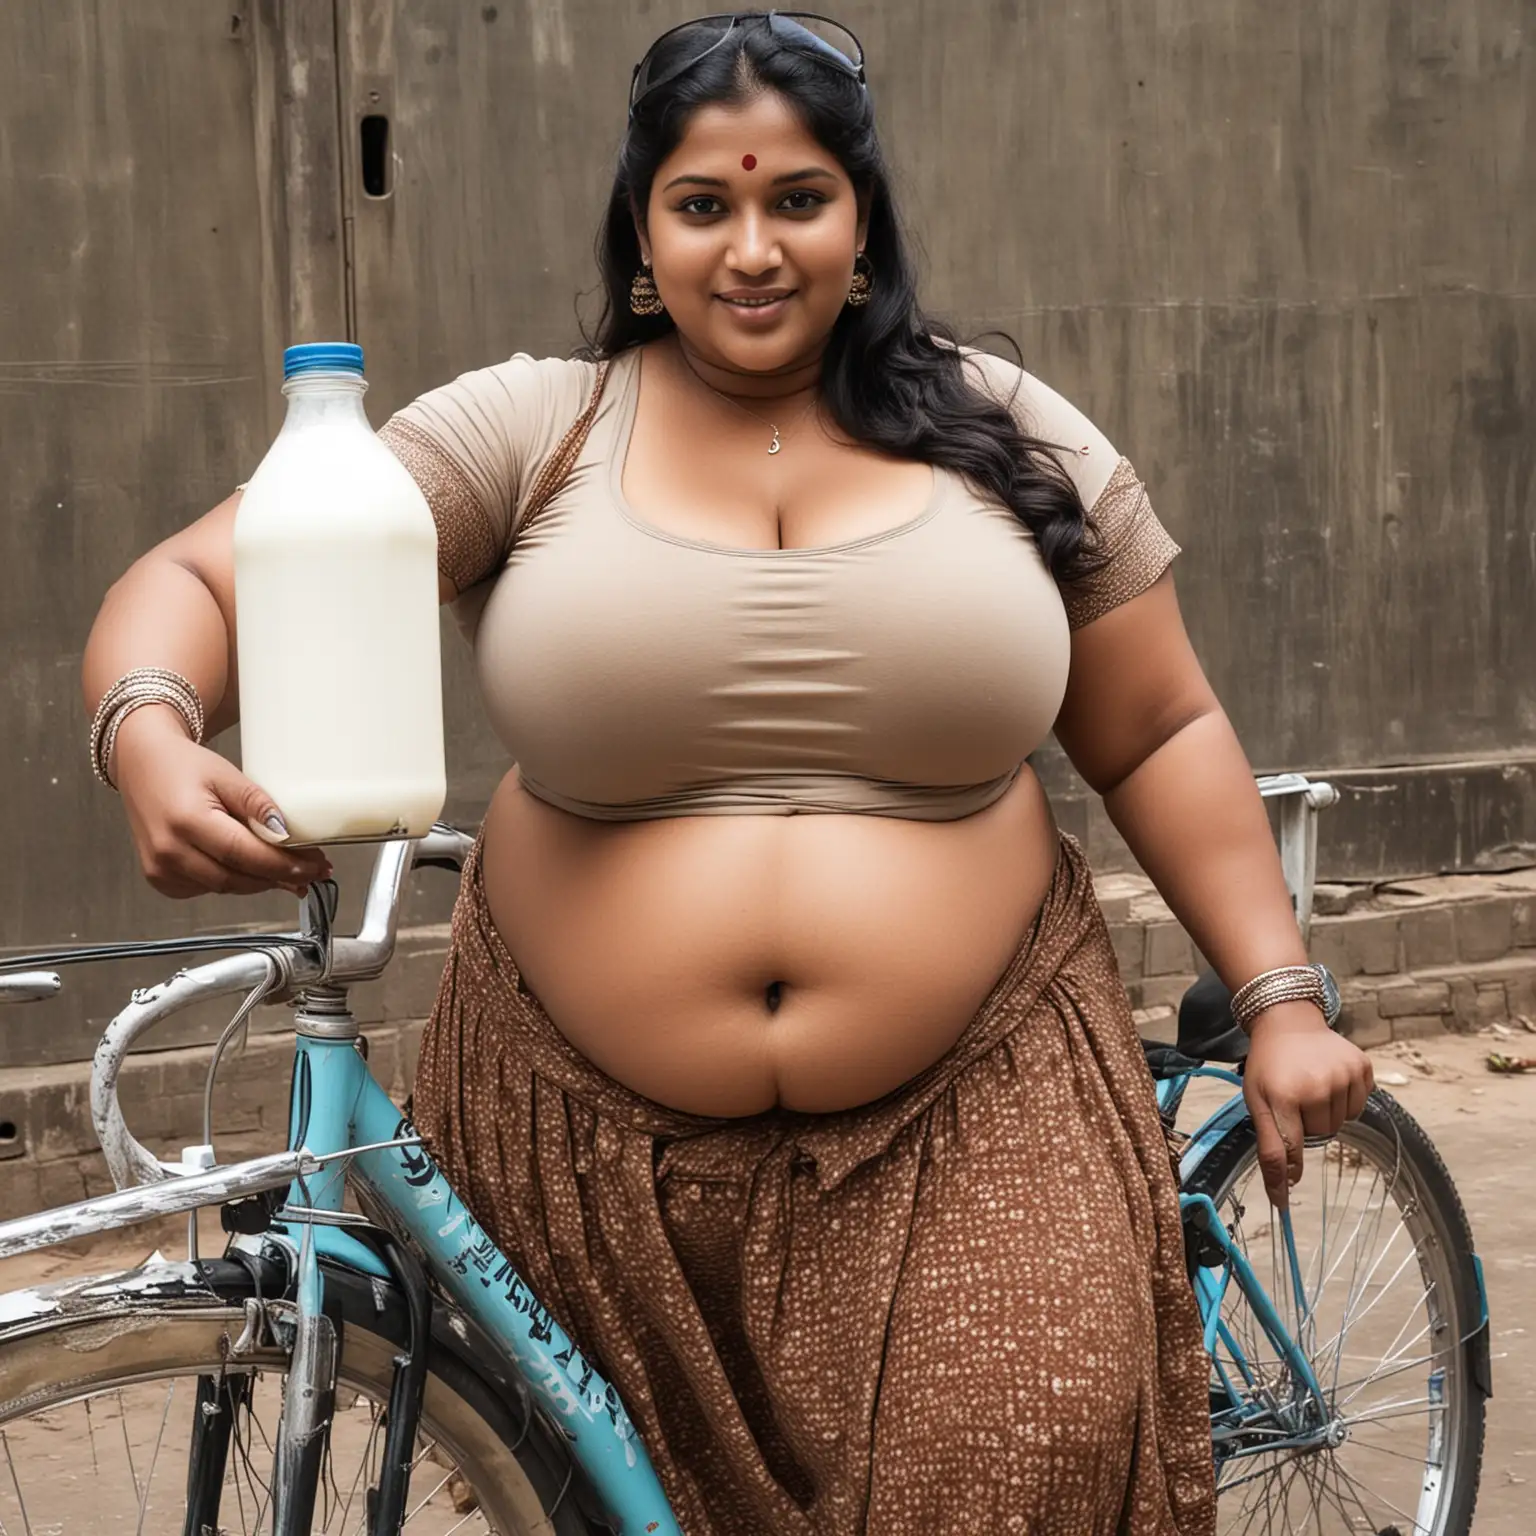 A super sexy fat BBW Indian woman, she delivere milk with bicycles